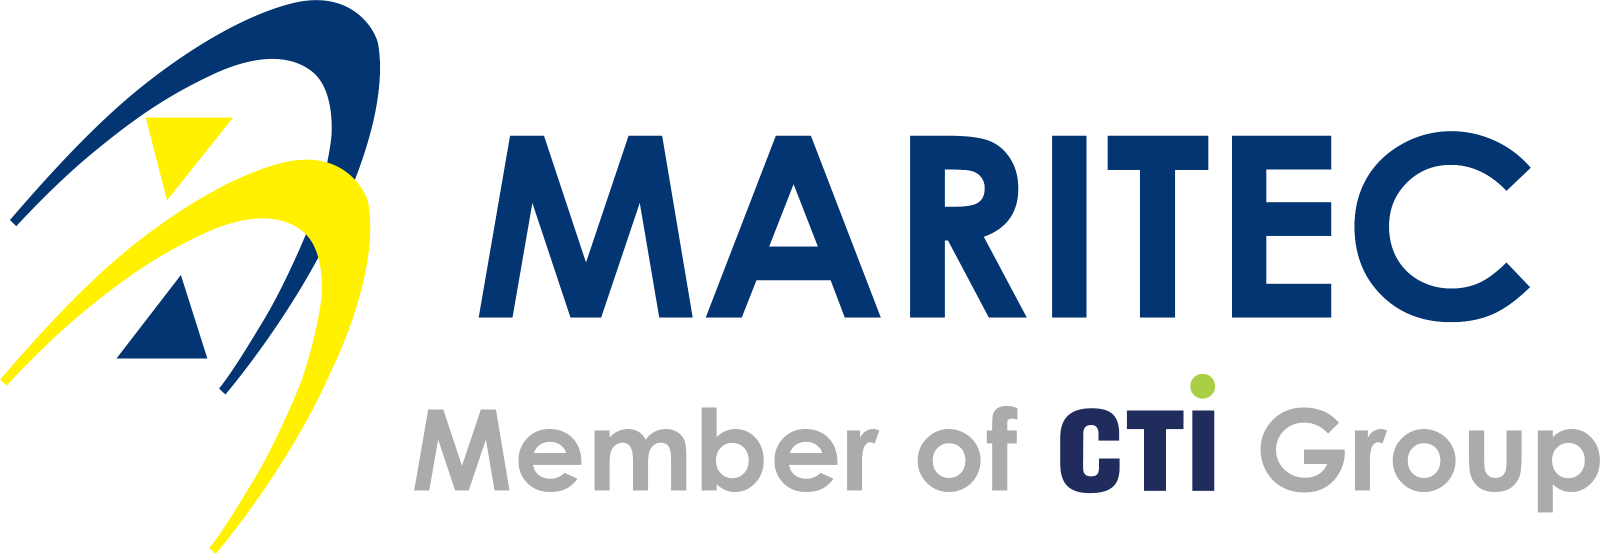 Maritec Pte Ltd, A member of CTI Group, was incorporated in 1999 as a